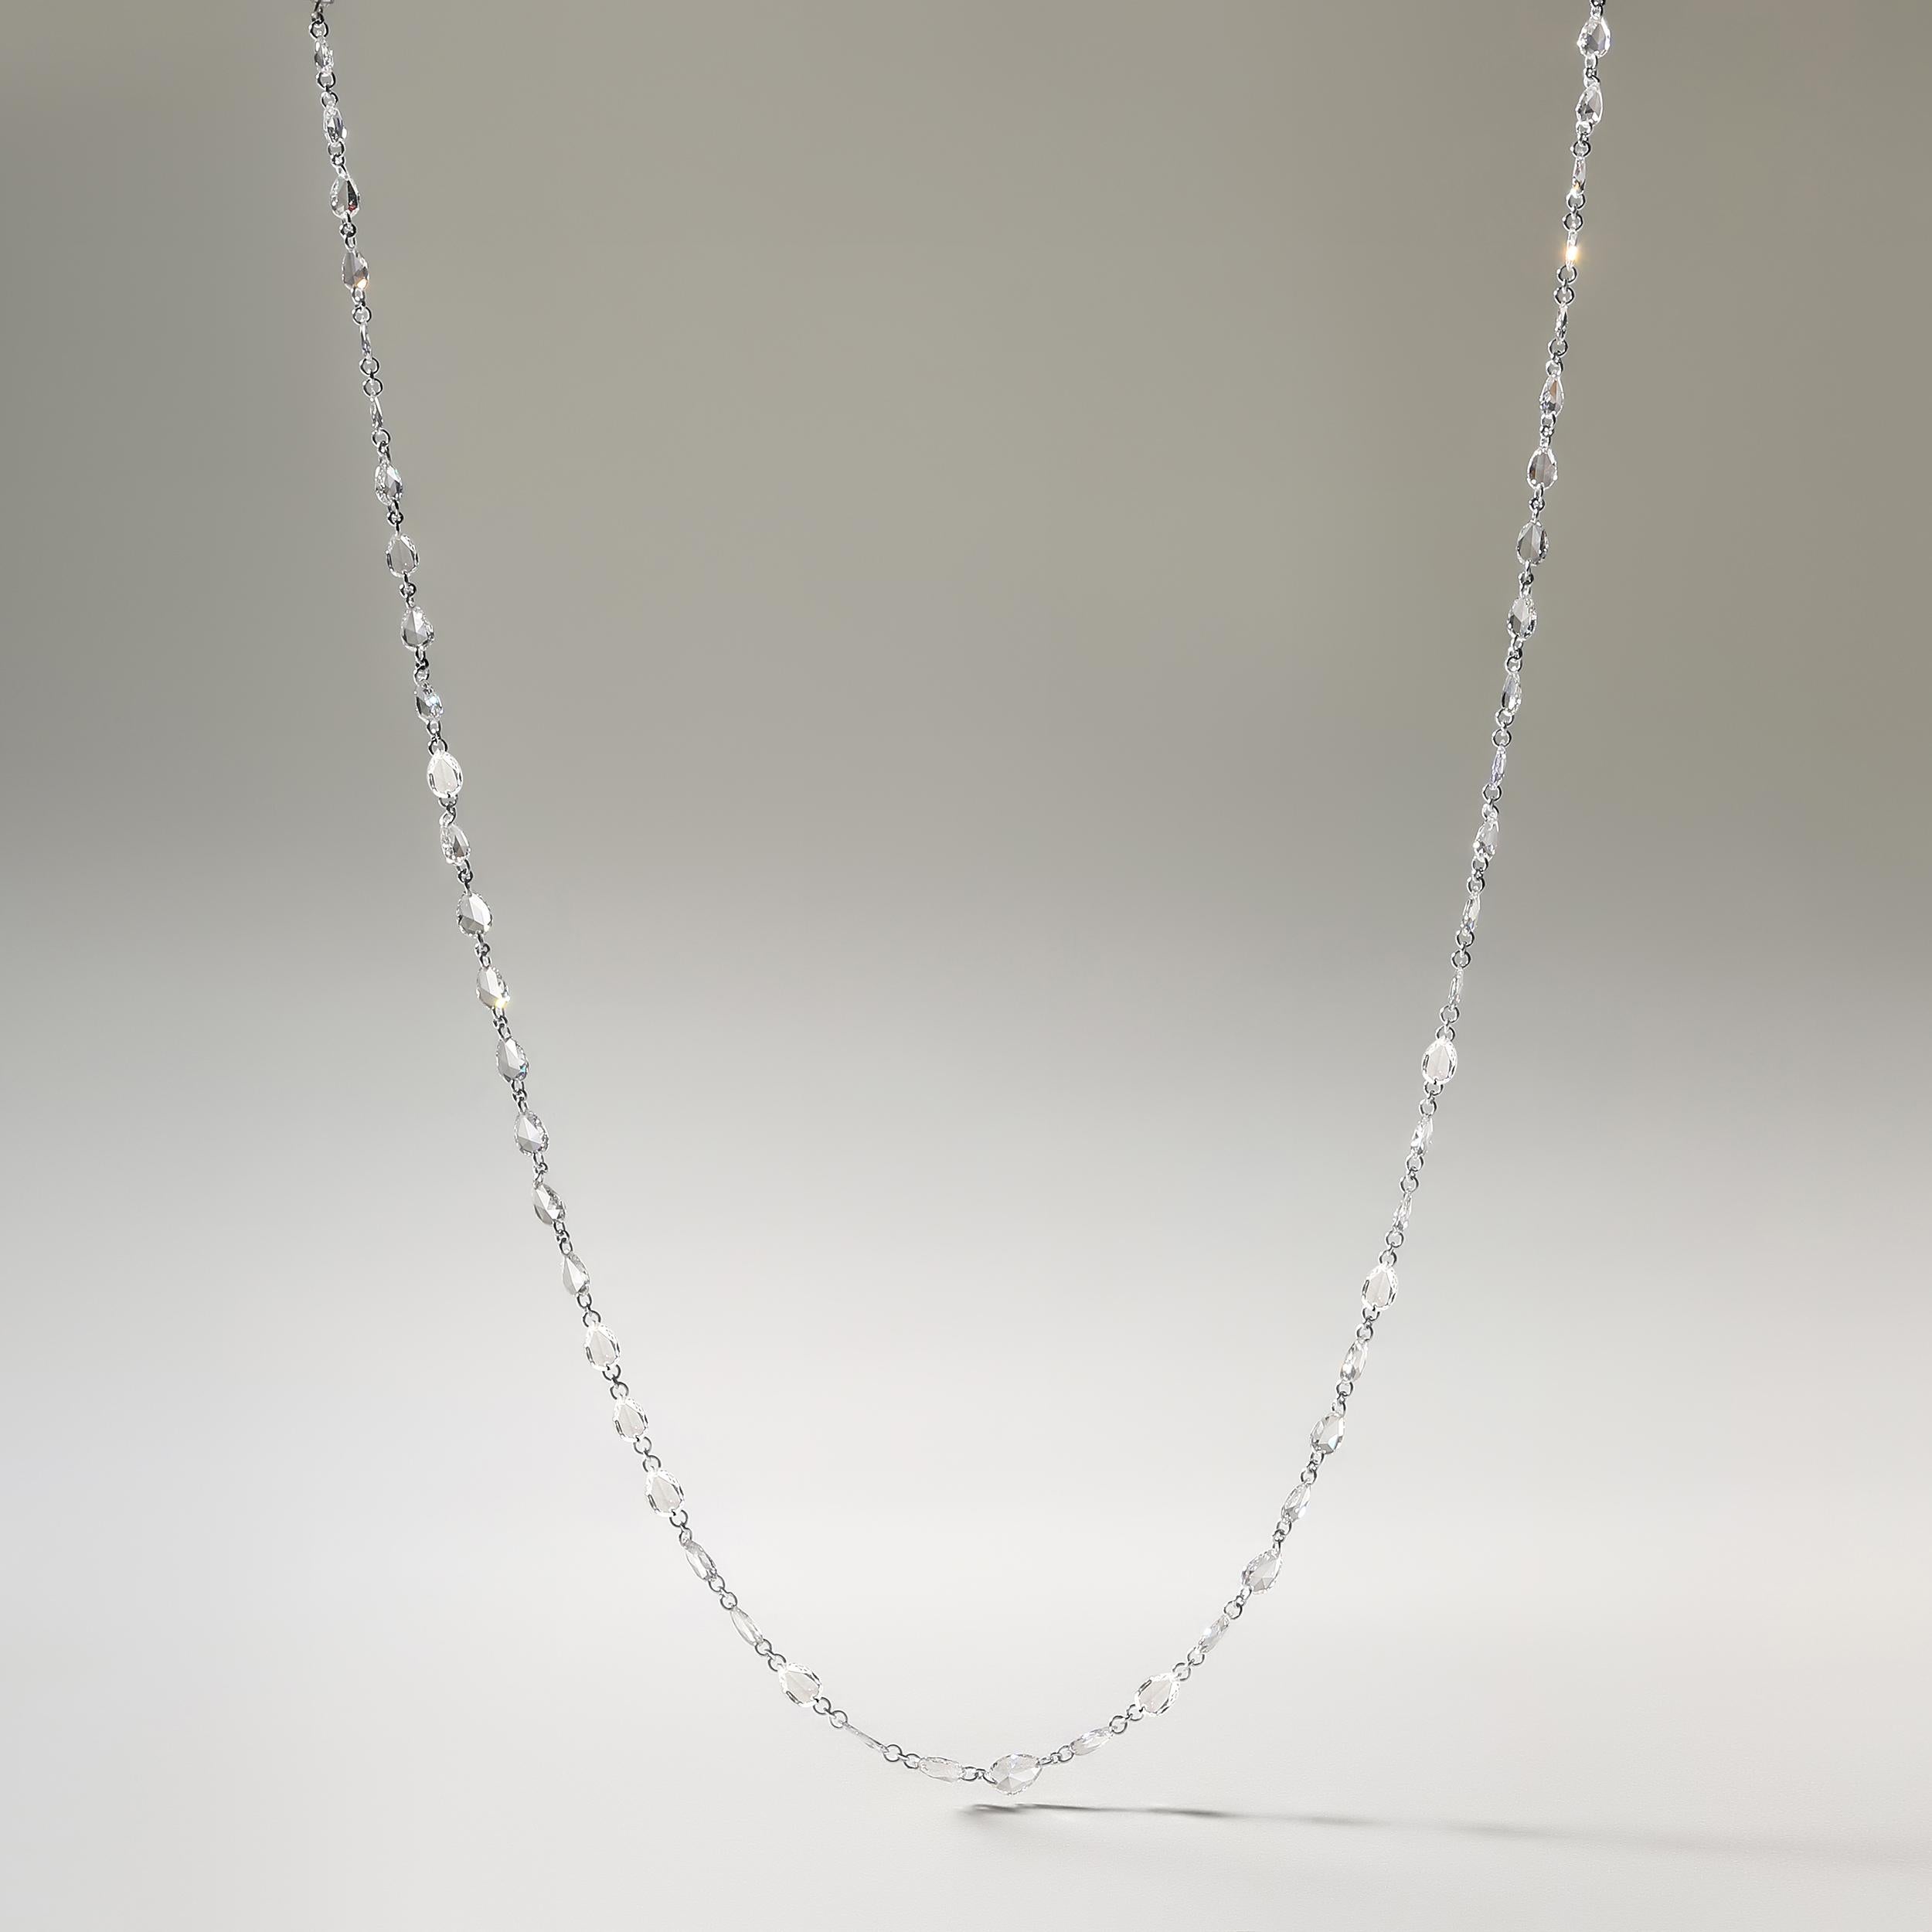 Crafted in 2.55 grams of 18K White Gold, the necklace contains 70 stones of Pear Shaped Rose Cut Natural Natural Diamonds with a total of 5.64 carat in E-F color and VVS-VS clarity. The necklace length is 18 inches.

CONTEMPORARY AND TIMELESS